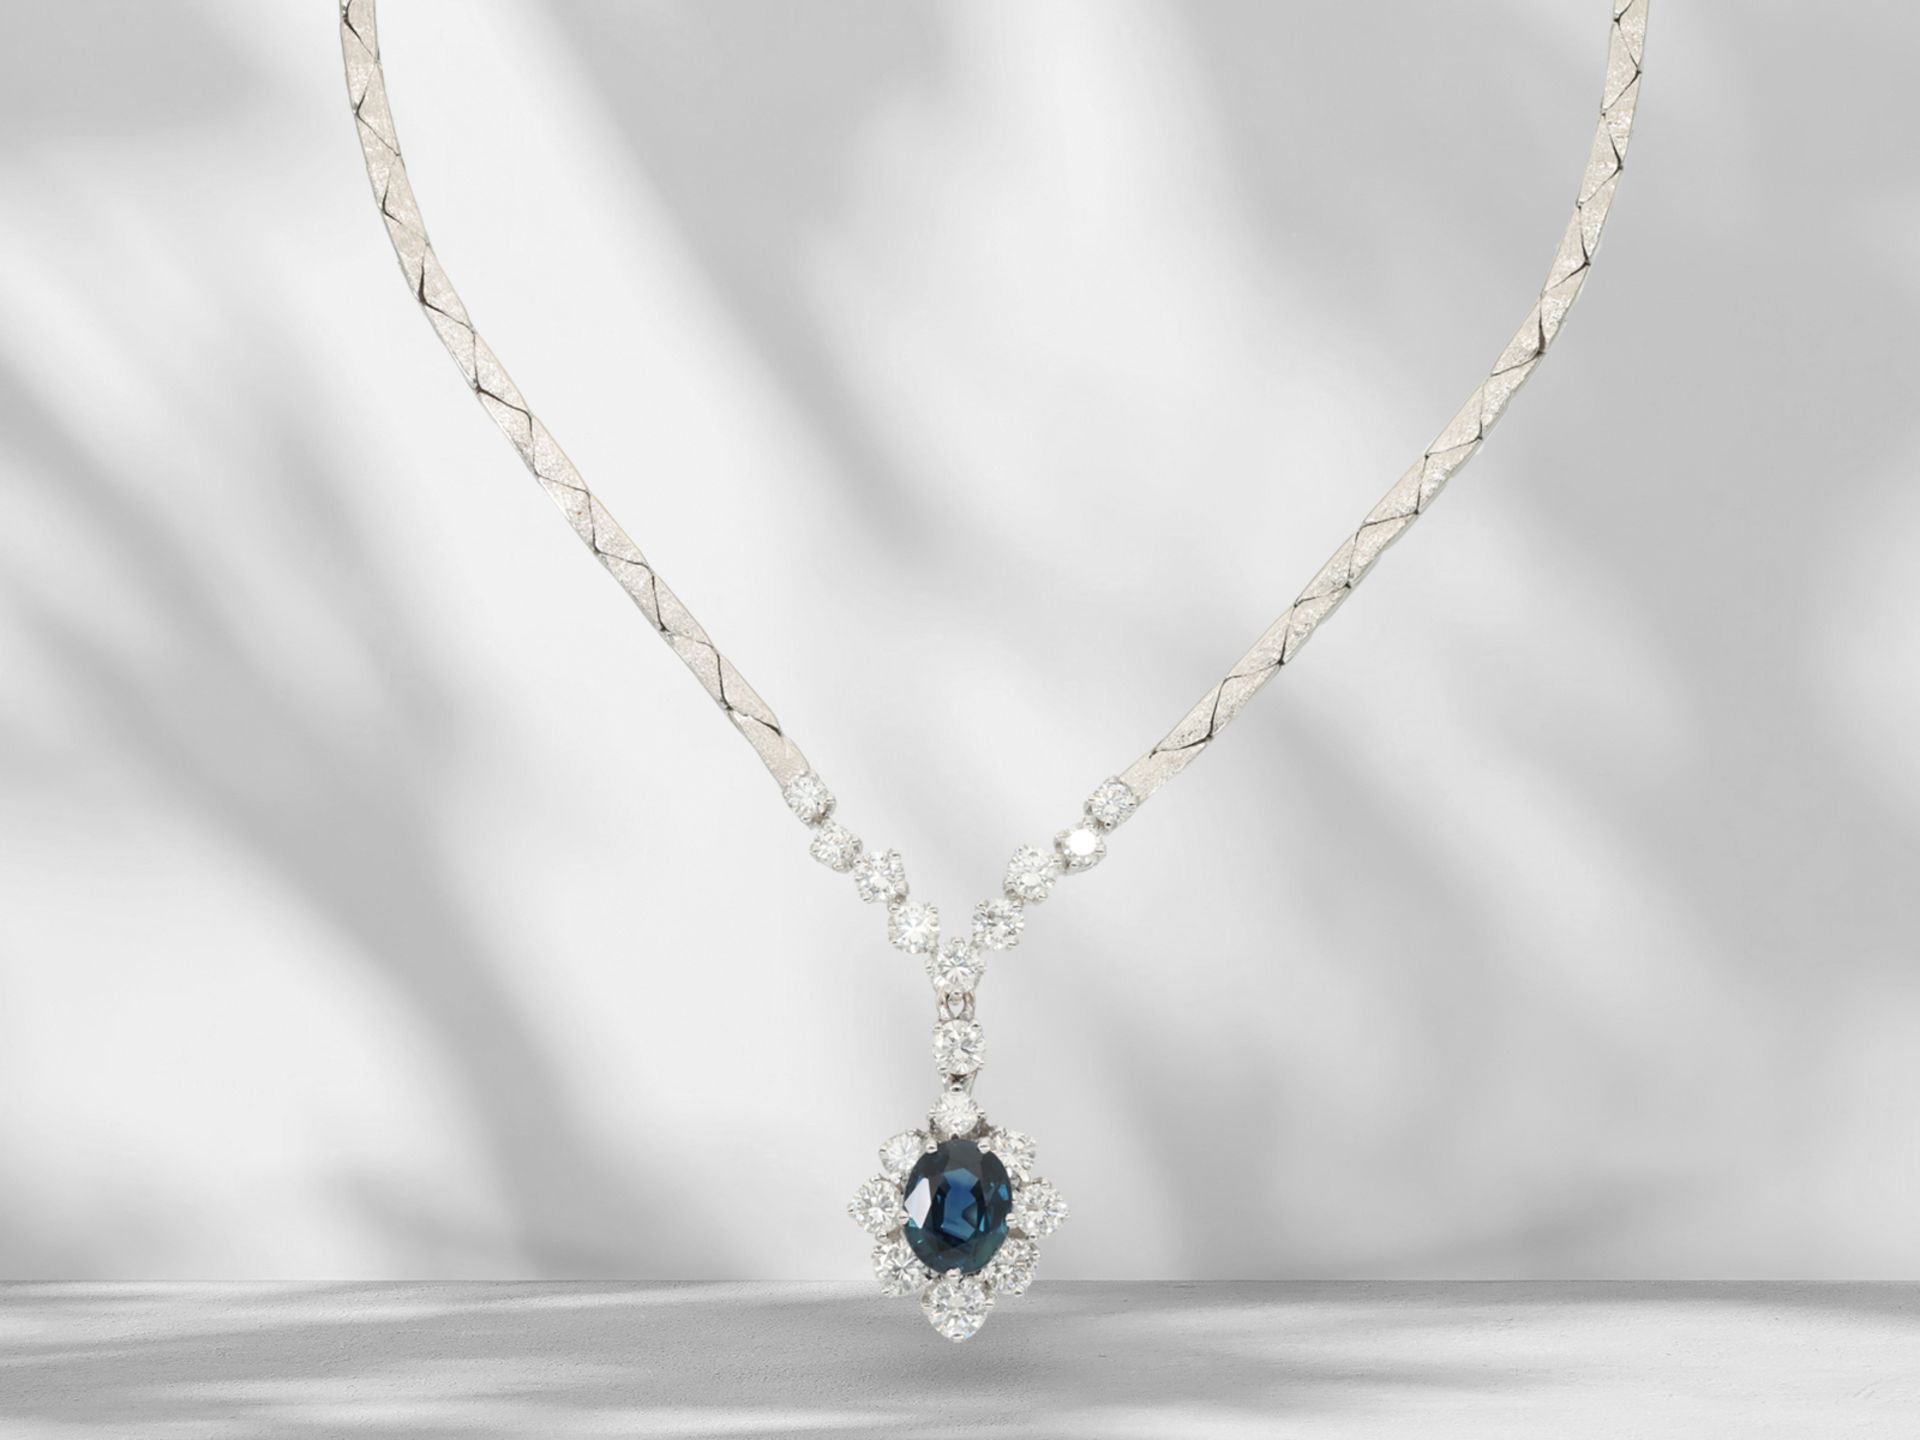 Chain/necklace: fine vintage centrepiece necklace with sapphire and brilliant-cut diamonds, approx. 